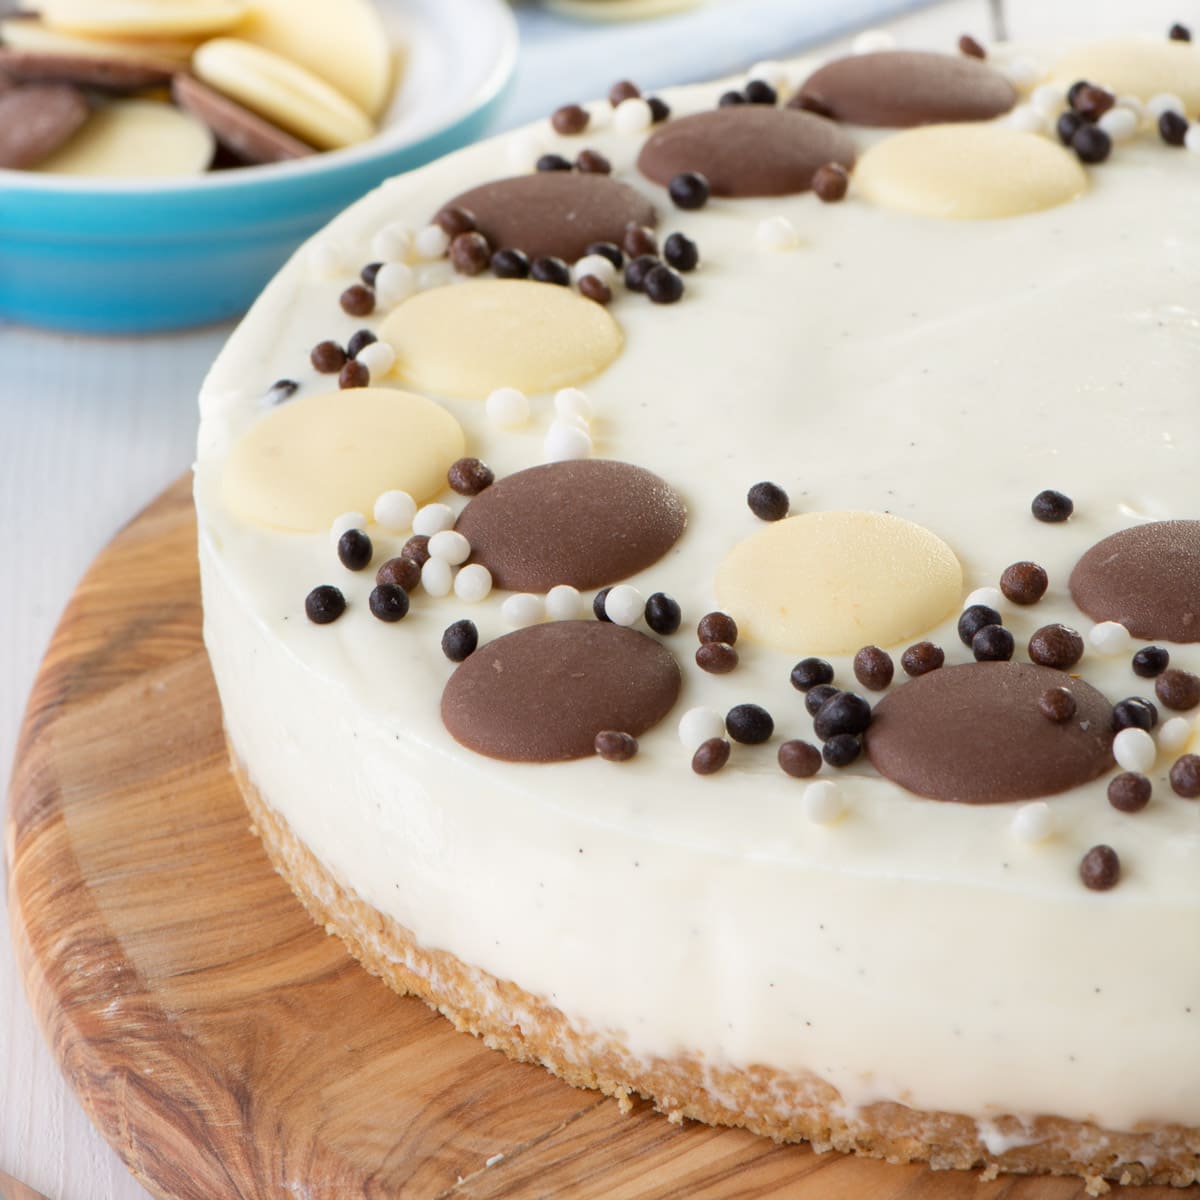 A white chocolate cheesecake on a wooden board.